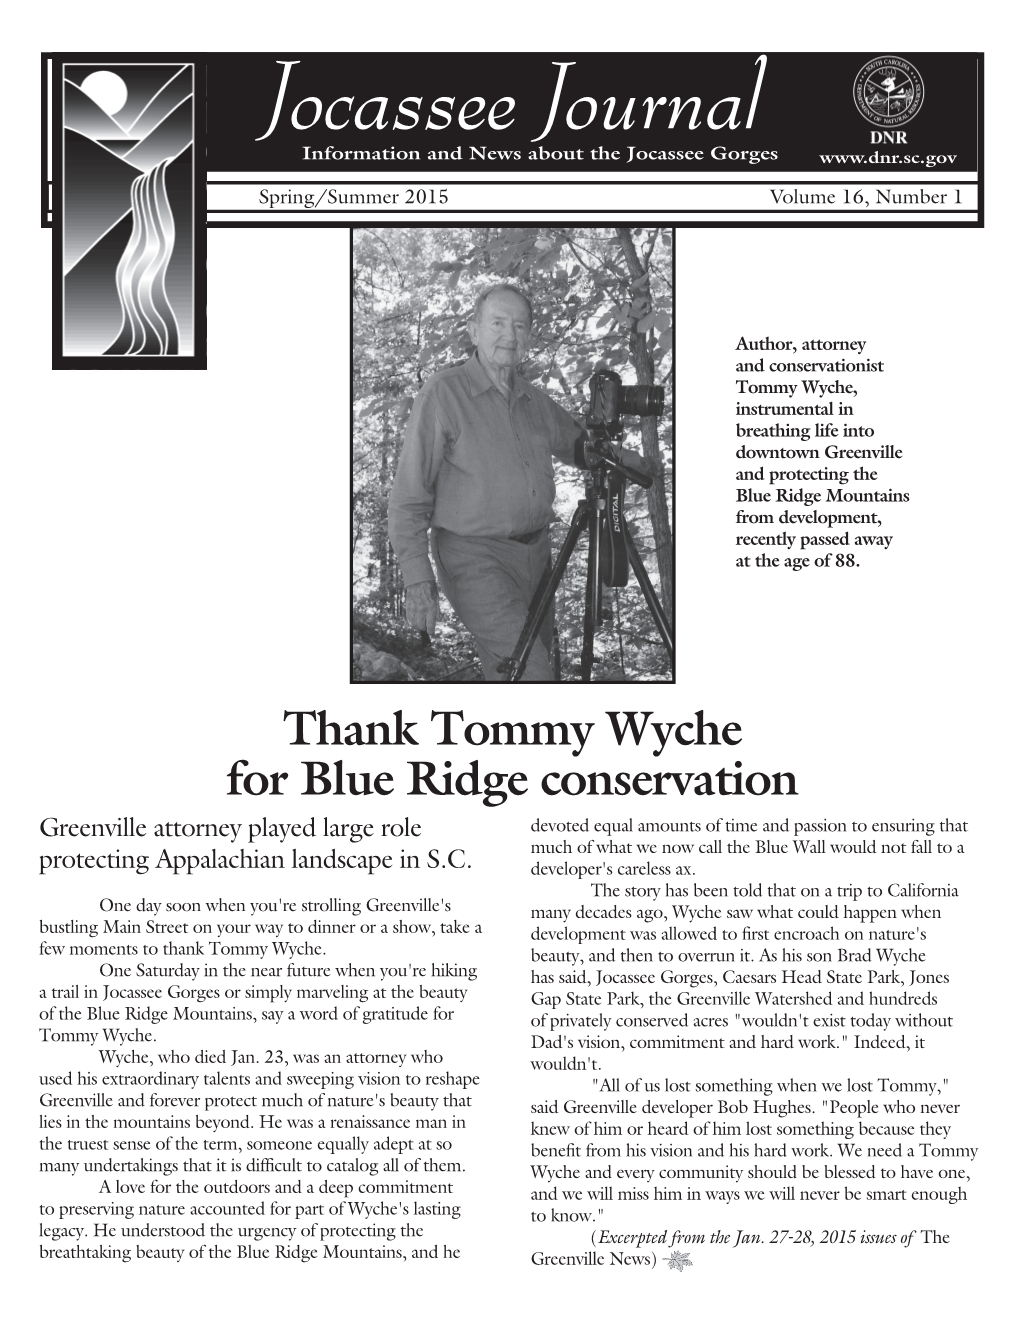 Jocassee Journal Information and News About the Jocassee Gorges